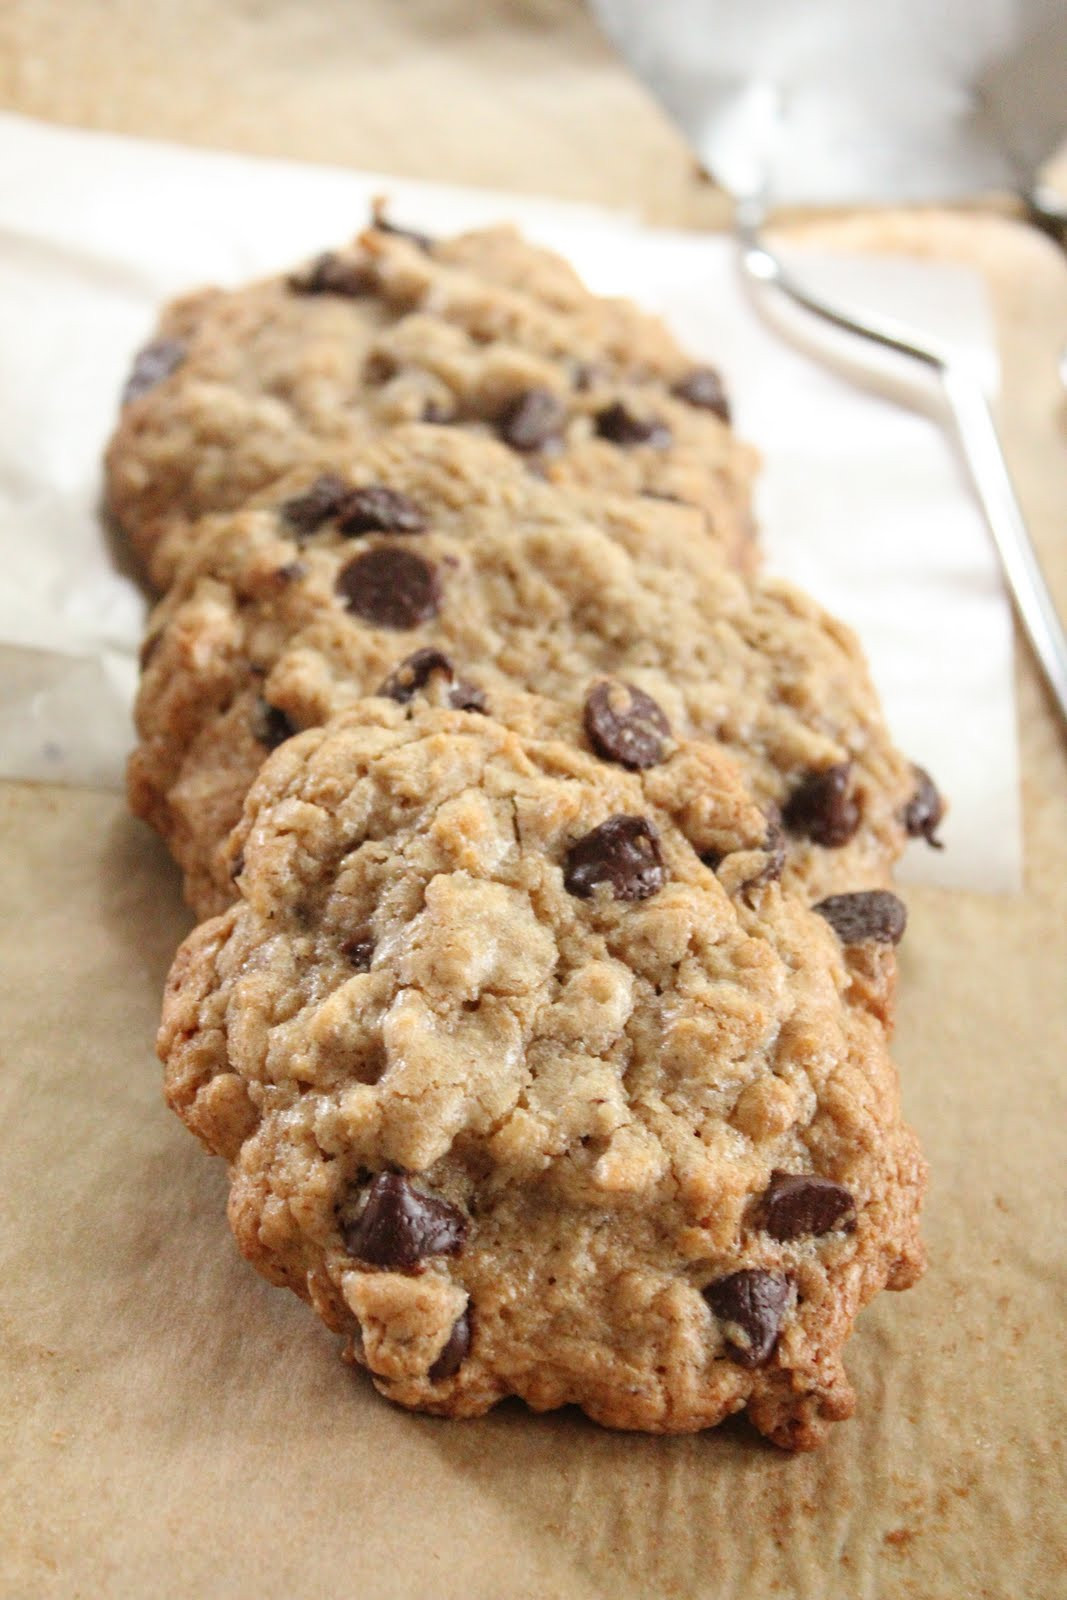 Oatmeal Chocolate Chip Cookies Healthy
 Ultimate healthier oatmeal and chocolate chip cookies